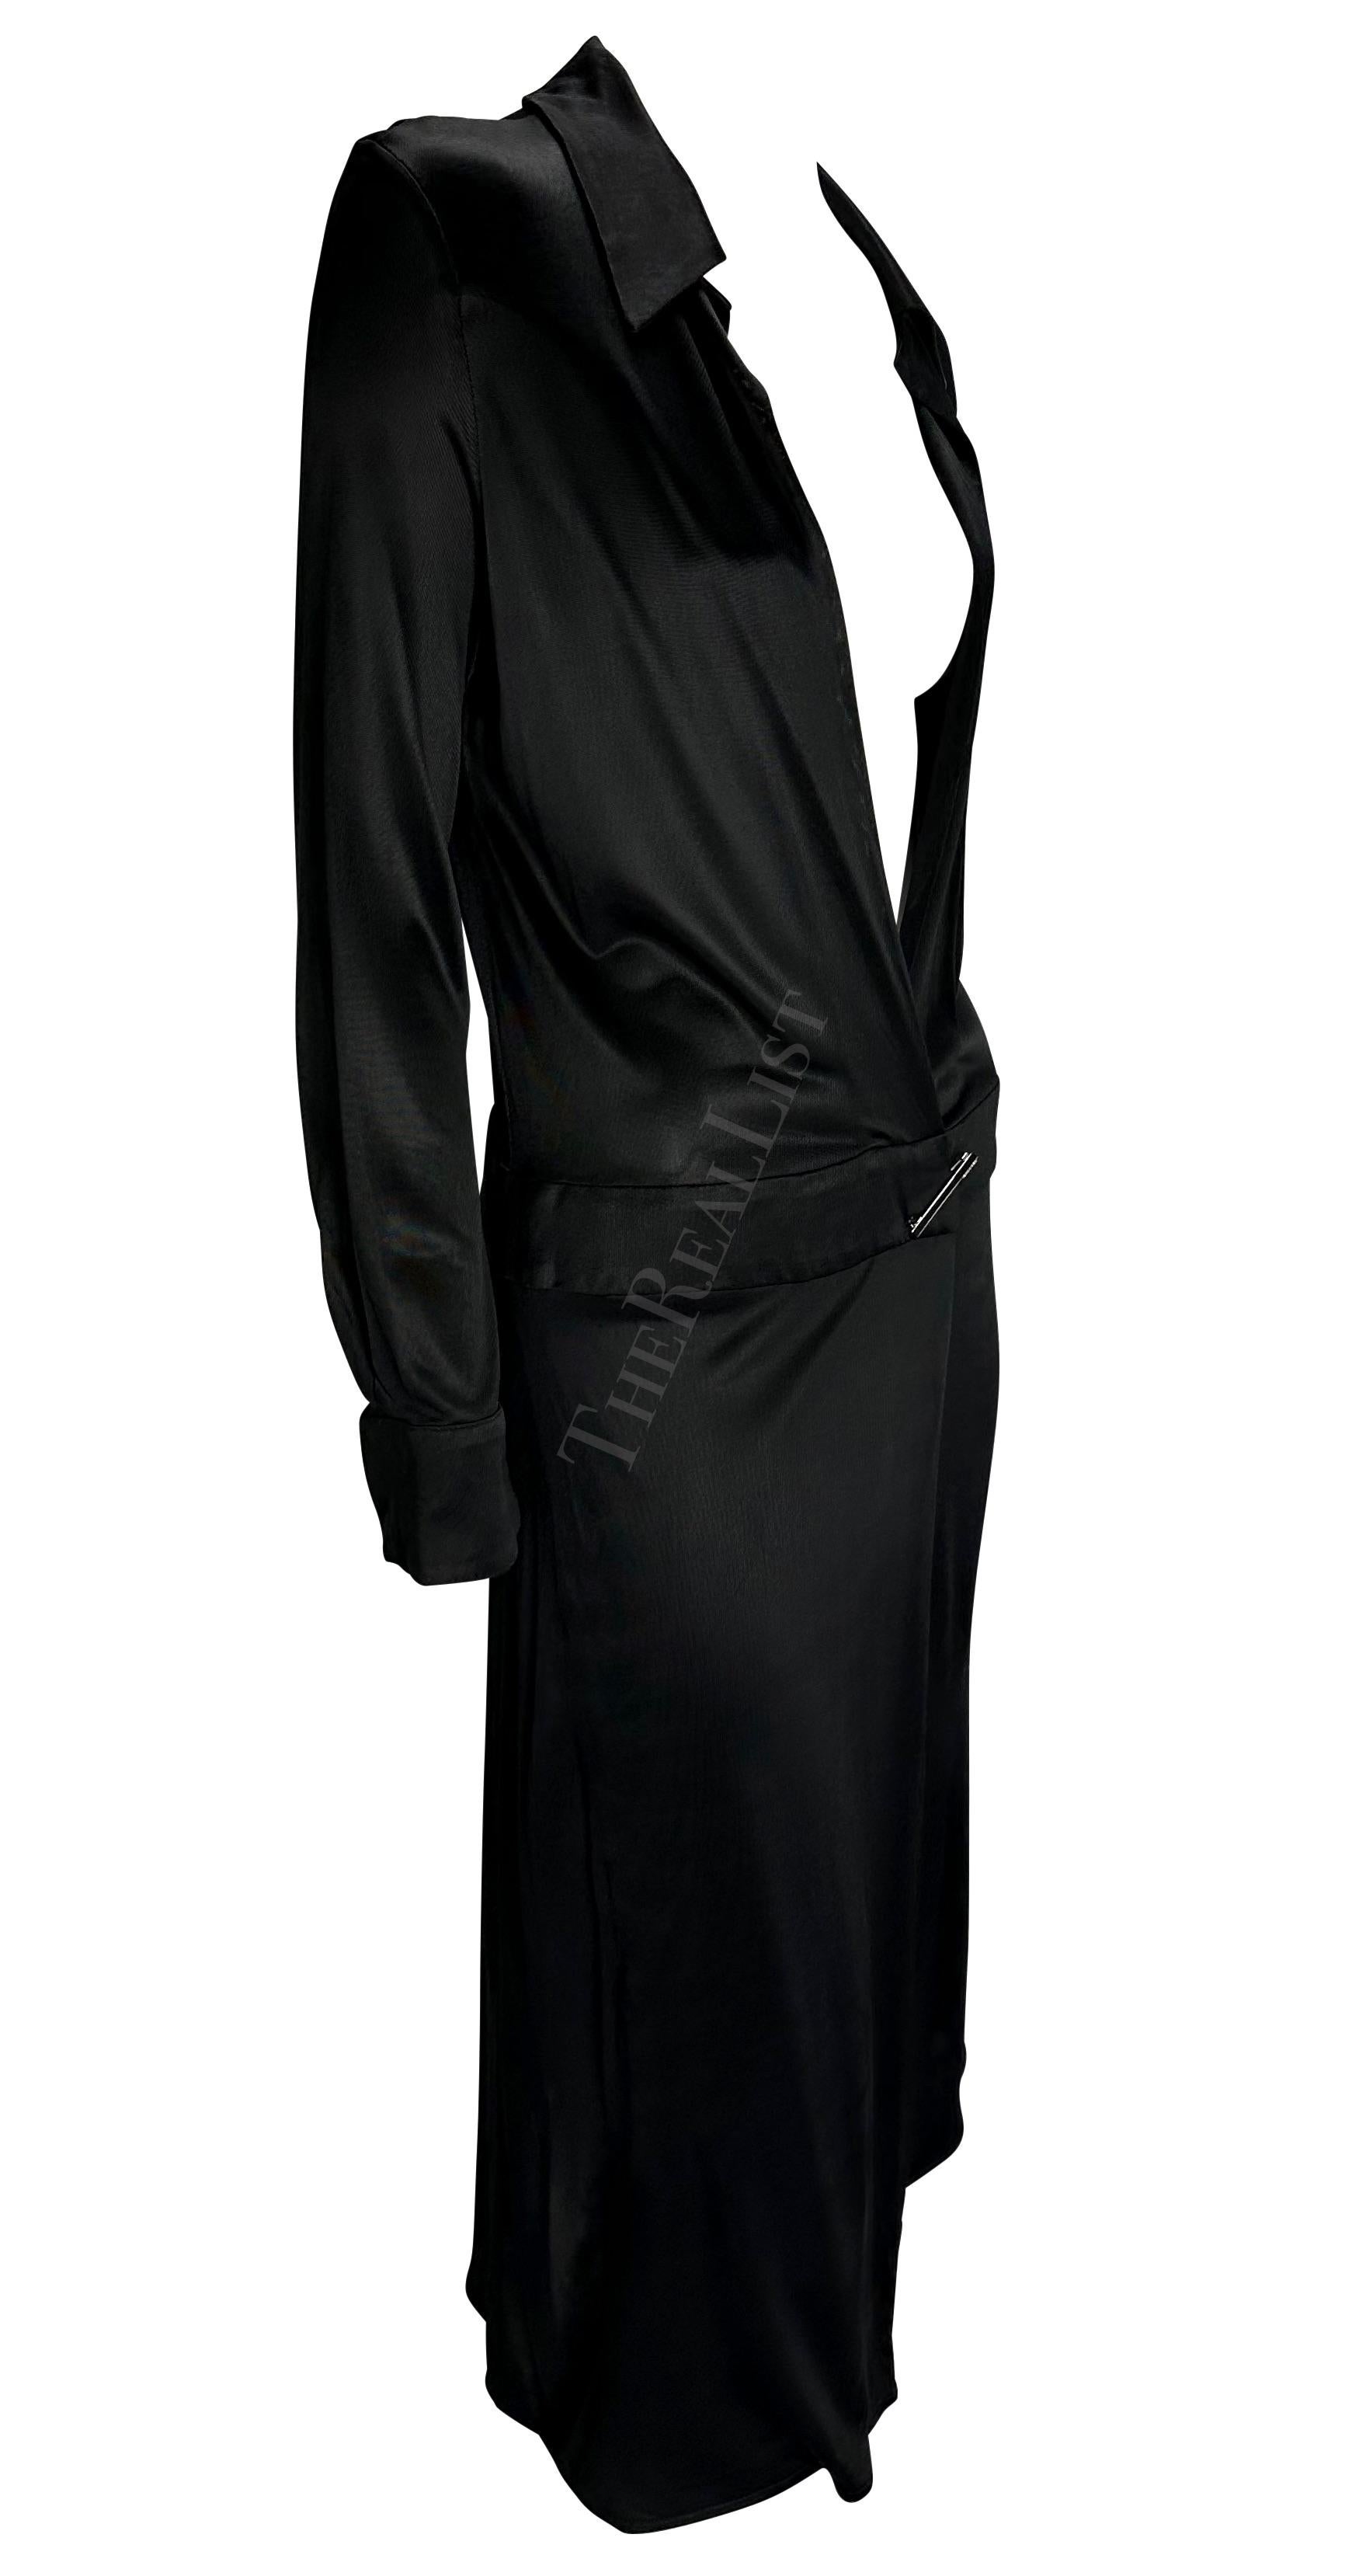 S/S 2000 Gucci by Tom Ford Runway Plunging Neckline Black Viscose Runway Dress For Sale 7